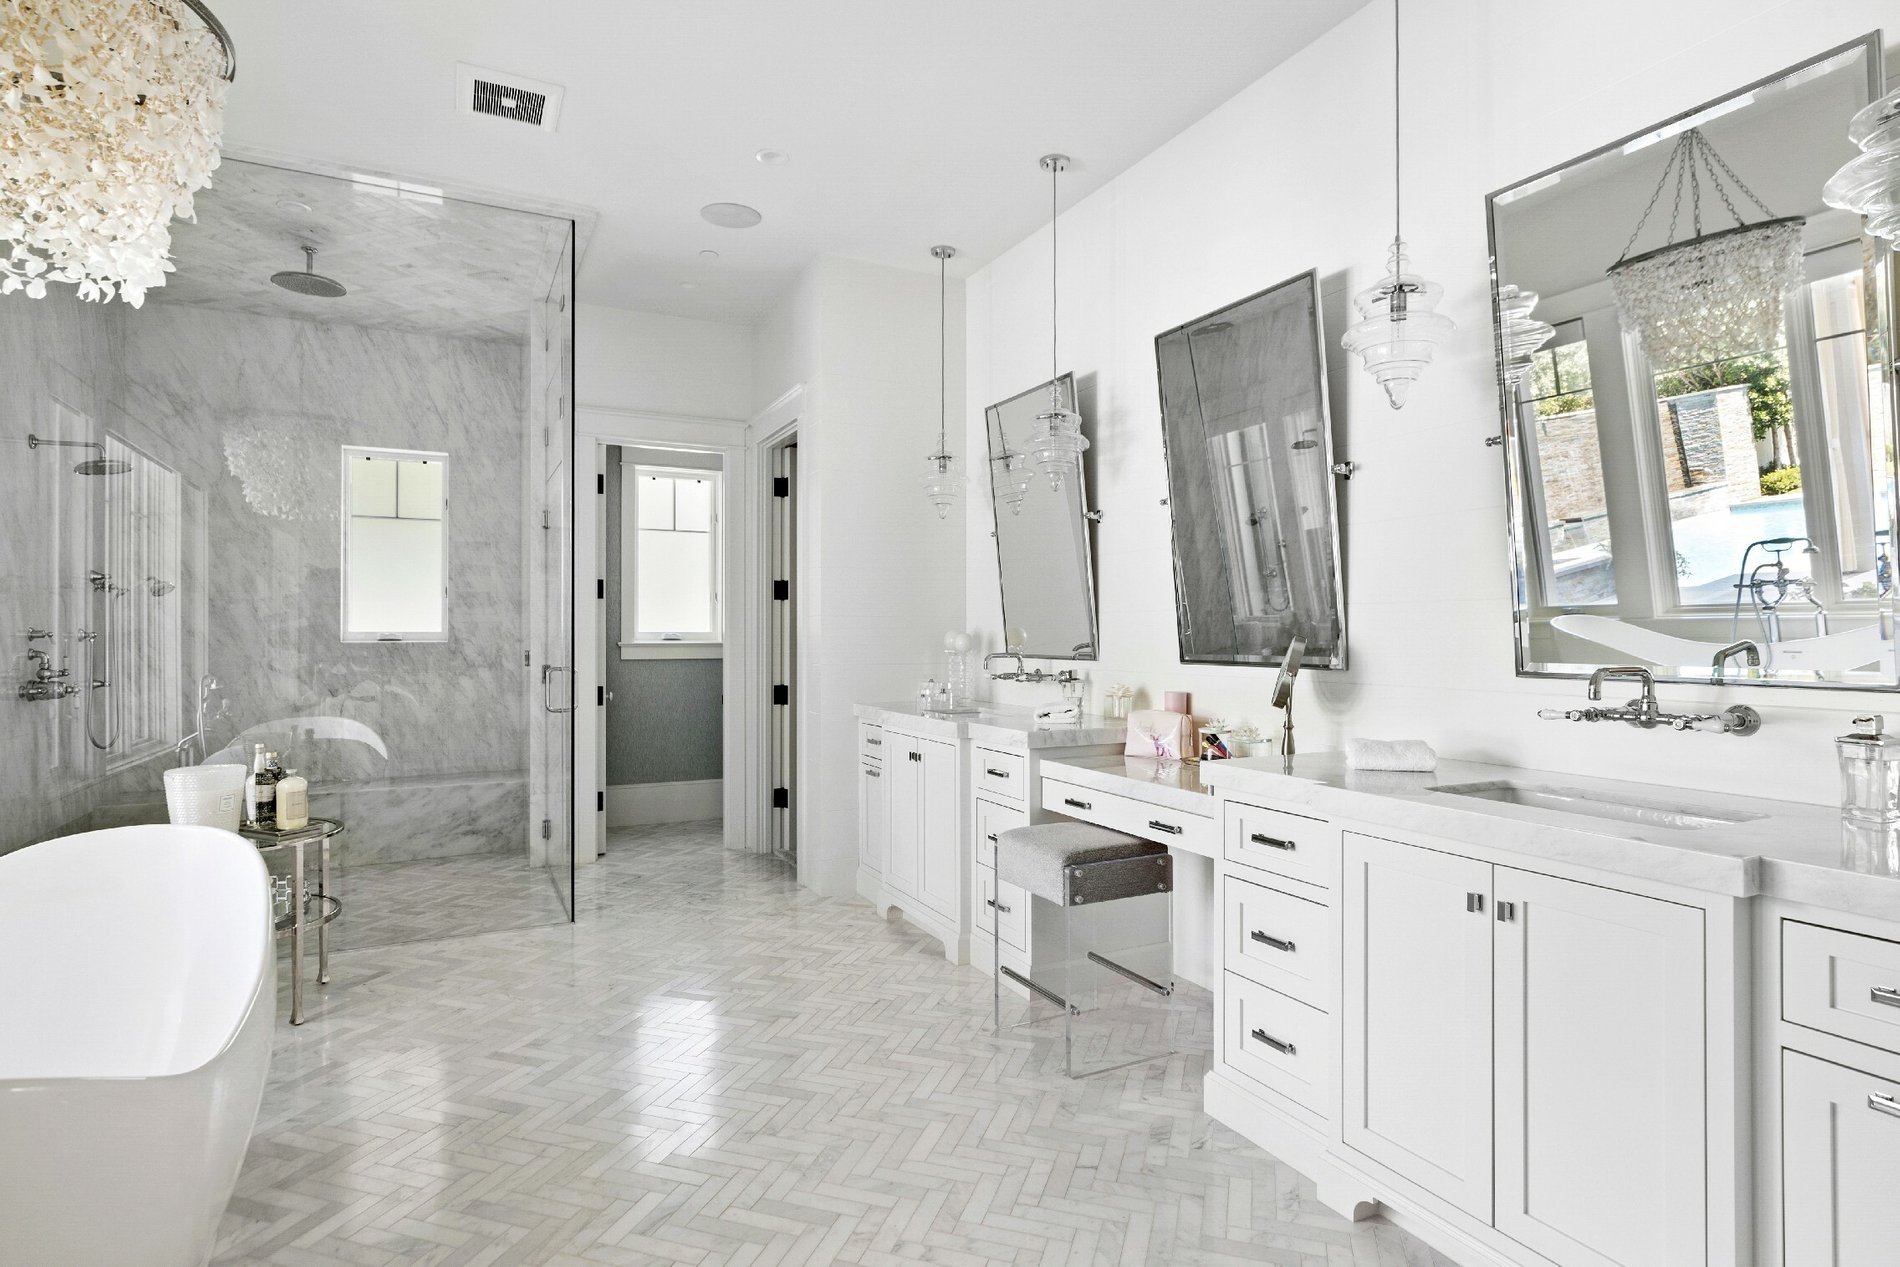 Roll-in shower in a beautiful all white and marble bathroom.